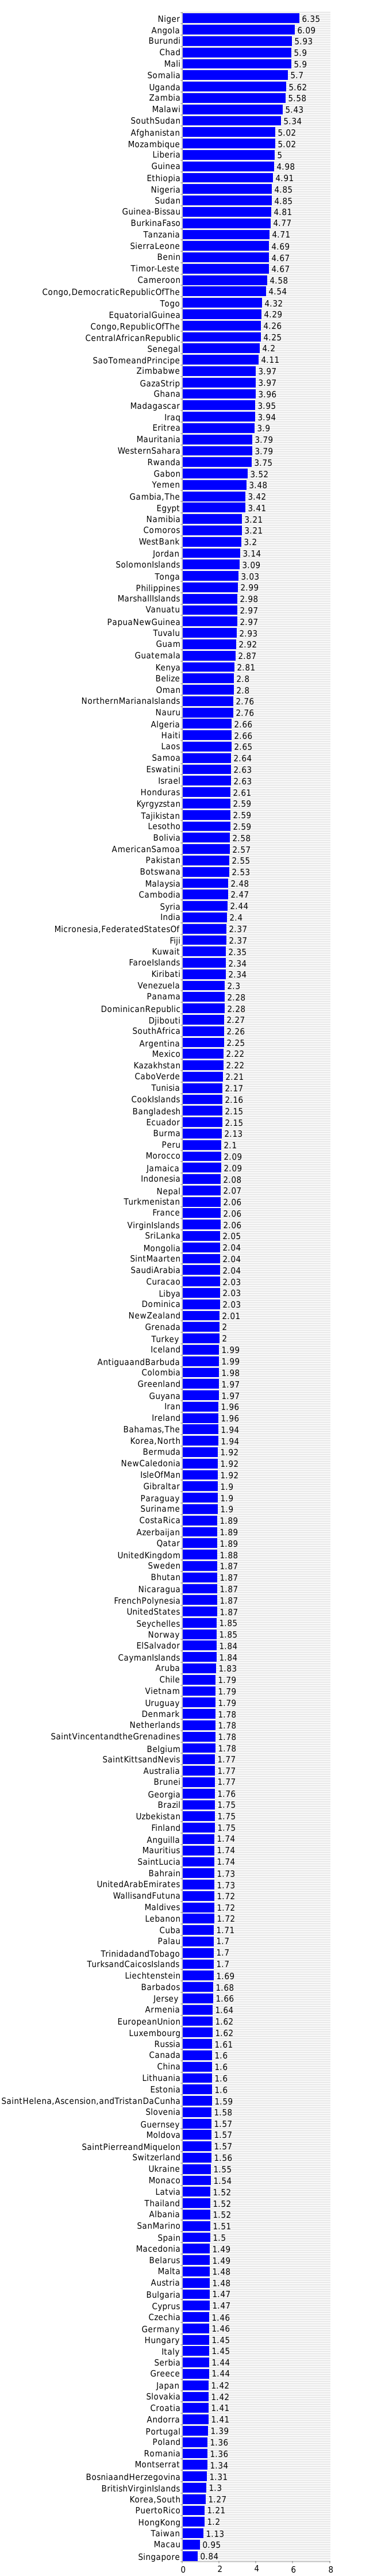  Total fertility rate (children born/woman) 2019 country comparisons, ranks, by Rank 